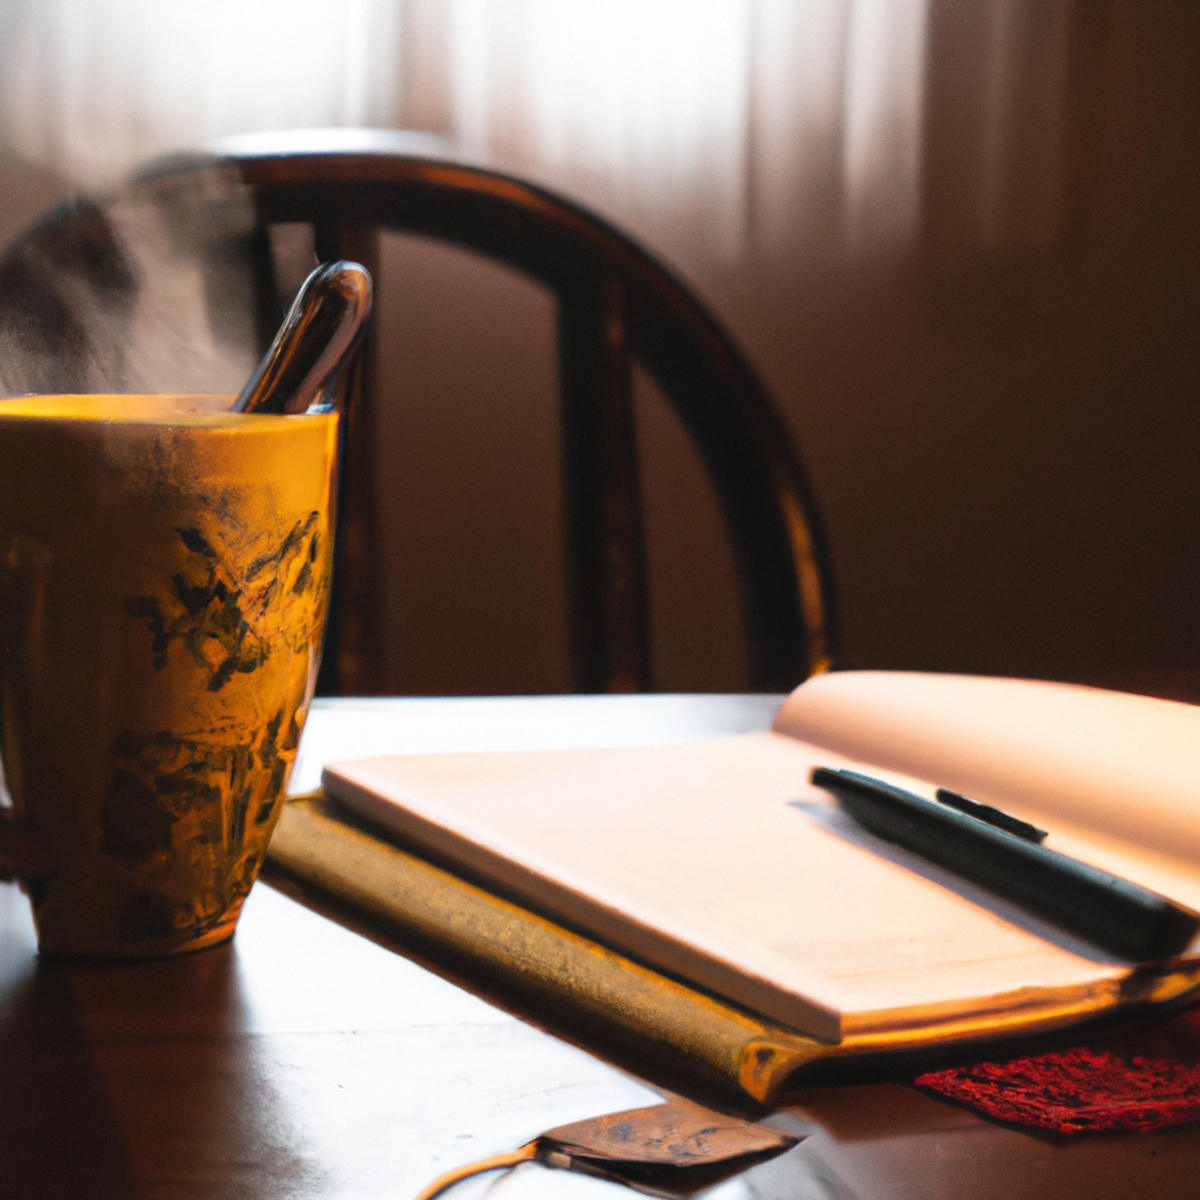 Cozy wooden table with tea, journal, and pen, promoting mindfulness and self-care through reflection and stress management.